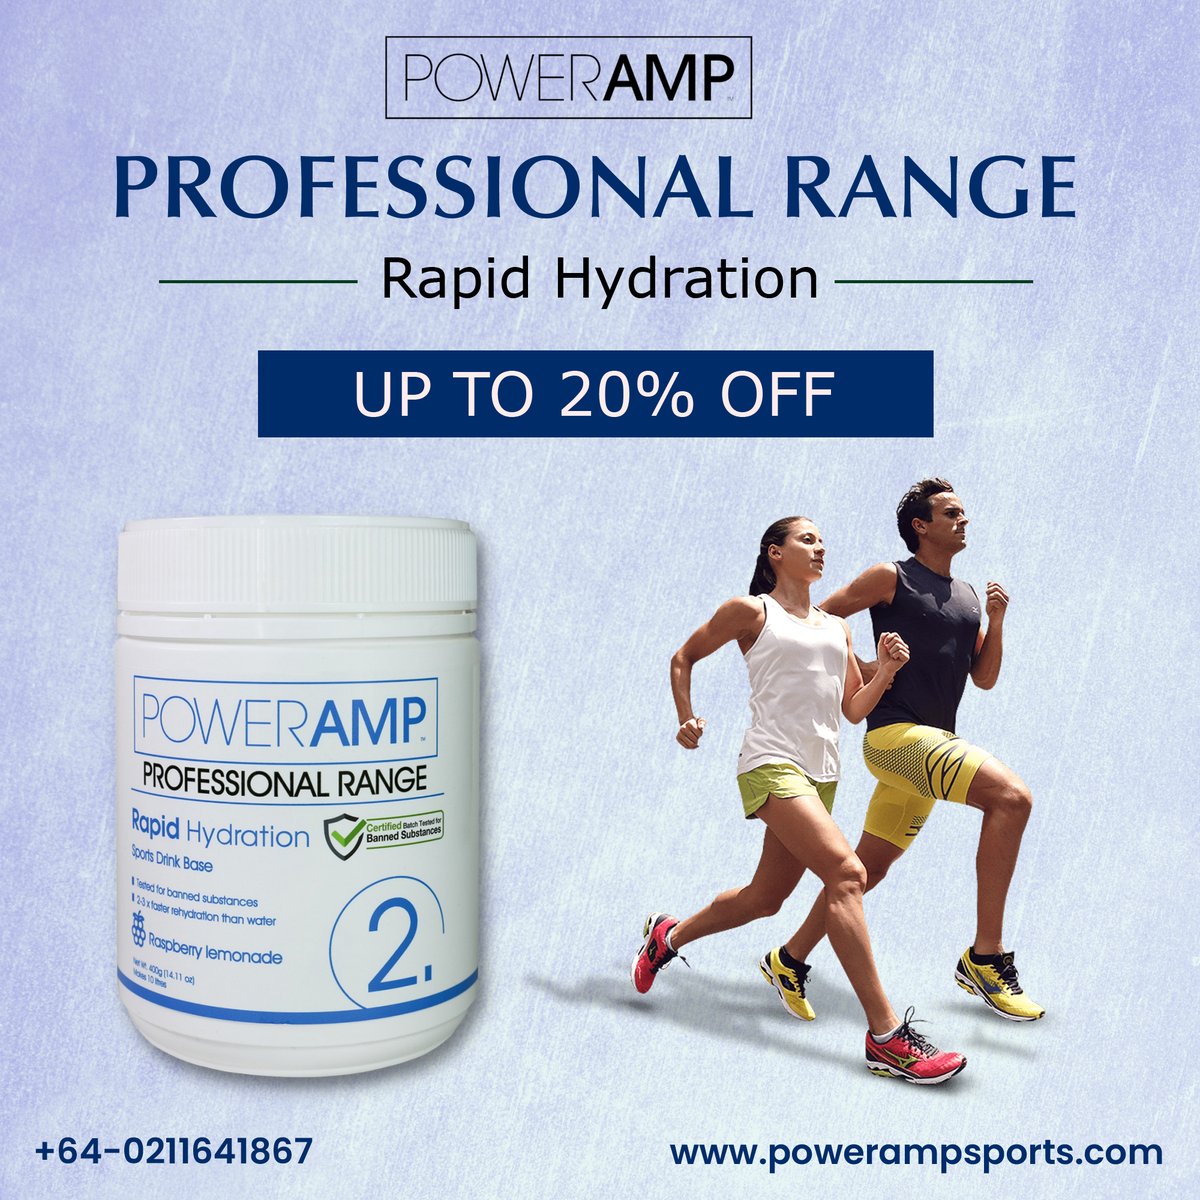 POWERAMP Rapid Hydration is the ideal hypotonic electrolyte re-hydration drink.
𝐆𝐞𝐭 𝐢𝐧 𝐭𝐨𝐮𝐜𝐡
𝐂𝐚𝐥𝐥 𝐔𝐬 𝐍𝐨𝐰 +64-0211641867
𝐄𝐦𝐚𝐢𝐥: Contact@powerampsports.com
𝐖𝐞𝐛𝐬𝐢𝐭𝐞: powerampsports.com
#Powerampsports #SportsNutrition #SportsAthletes #athletics